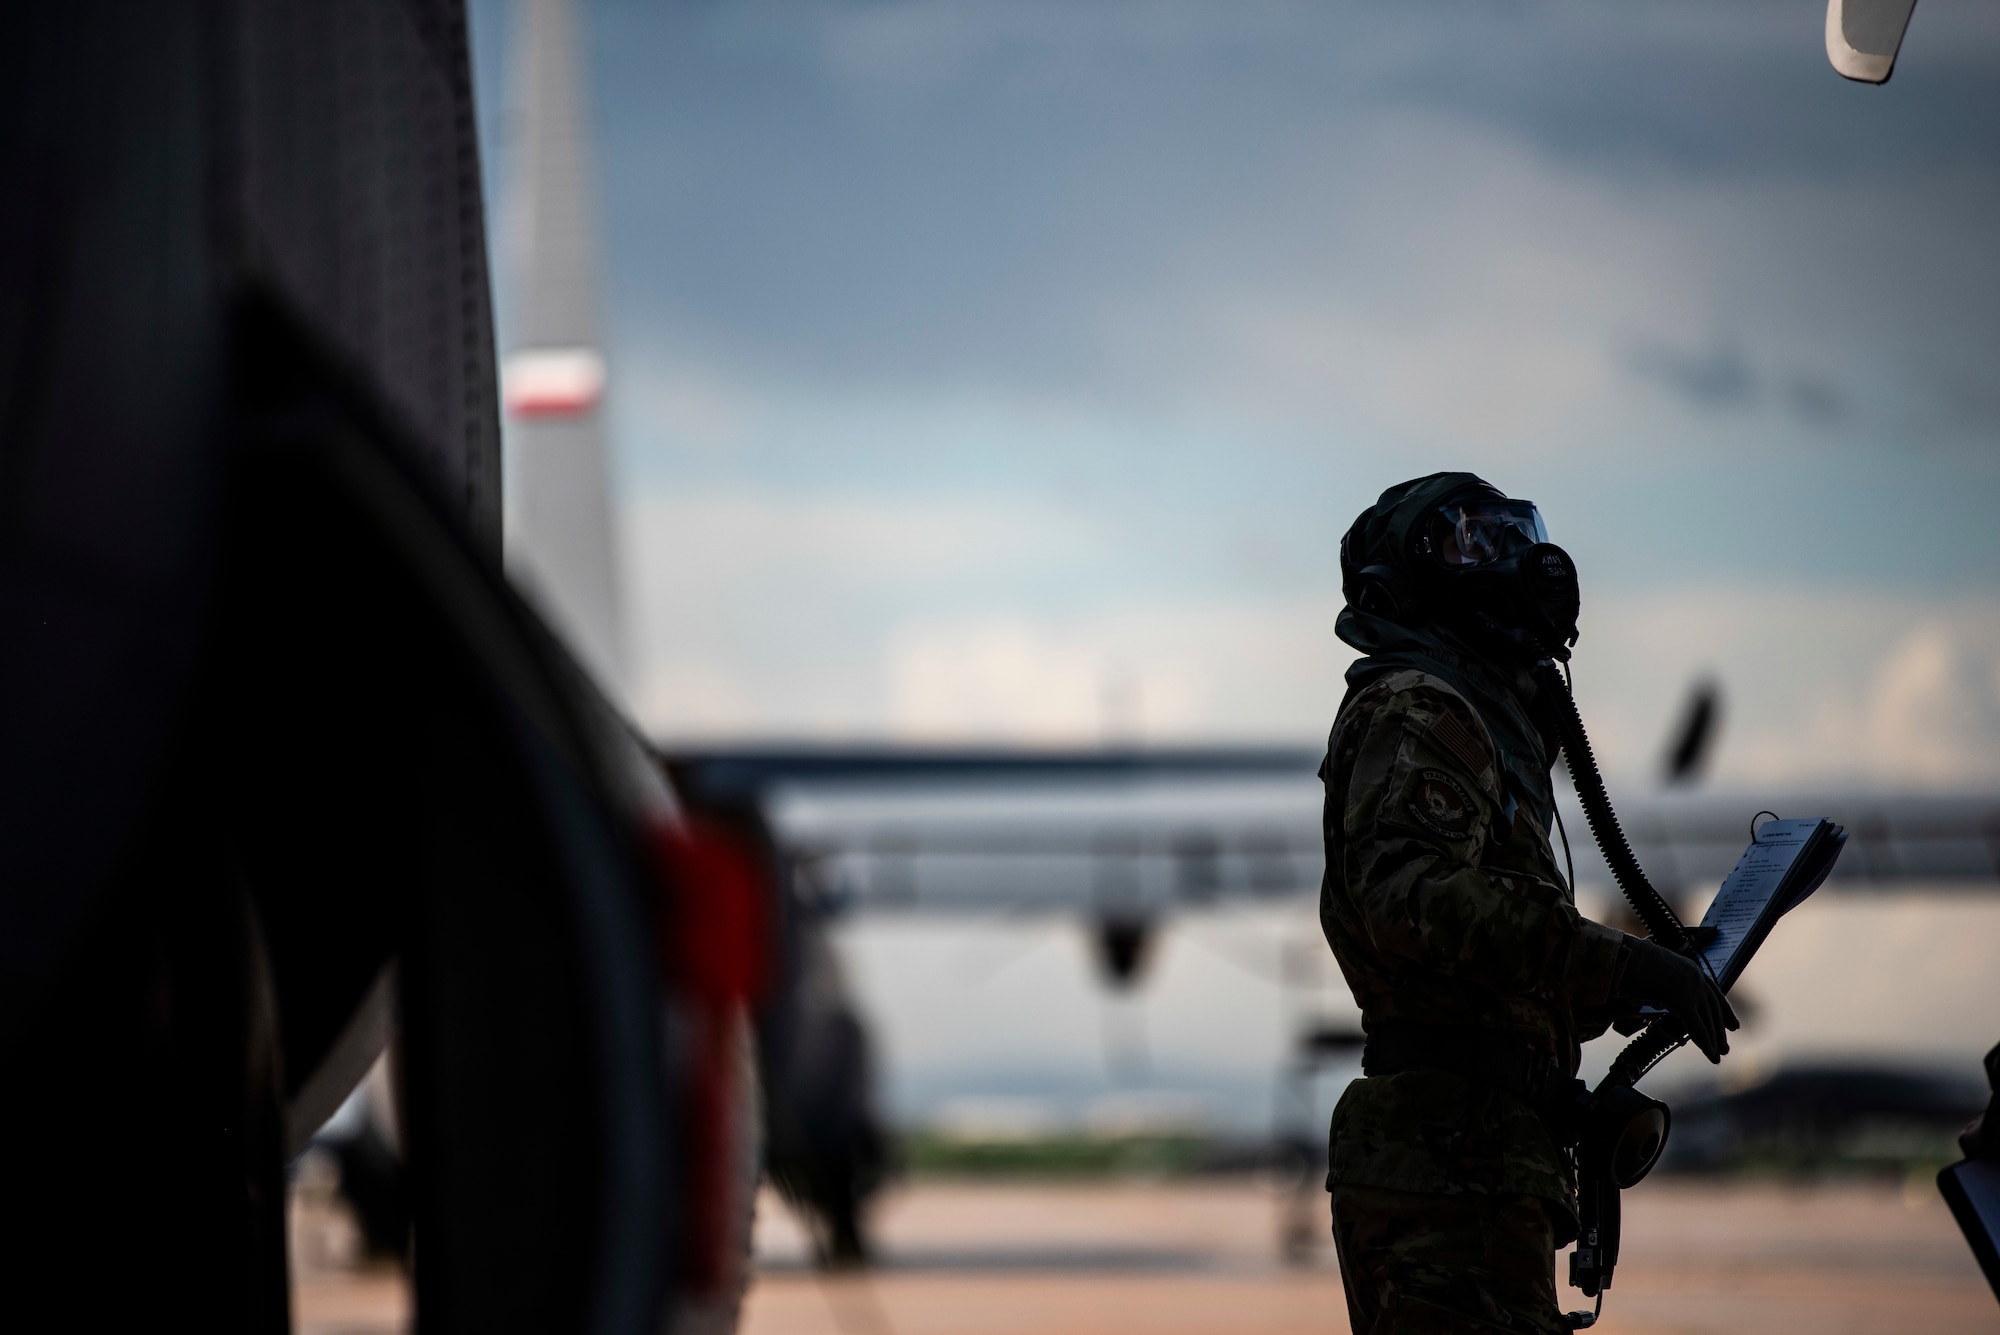 Senior Airman Noah Isom, 39th Airlift Squadron loadmaster, conducts preflight checks on a C-130J Super Hercules at Dyess Air Force Base, Texas, June 2, 2021. Aircrew simulated normal operations while field testing the new Two-Piece Undergarment universal integrative ensemble chemical, biological, radioactive and nuclear protective equipment in order to produce data needed to ensure its operability. (U.S. Air Force photo by Airman 1st Class Colin Hollowell)